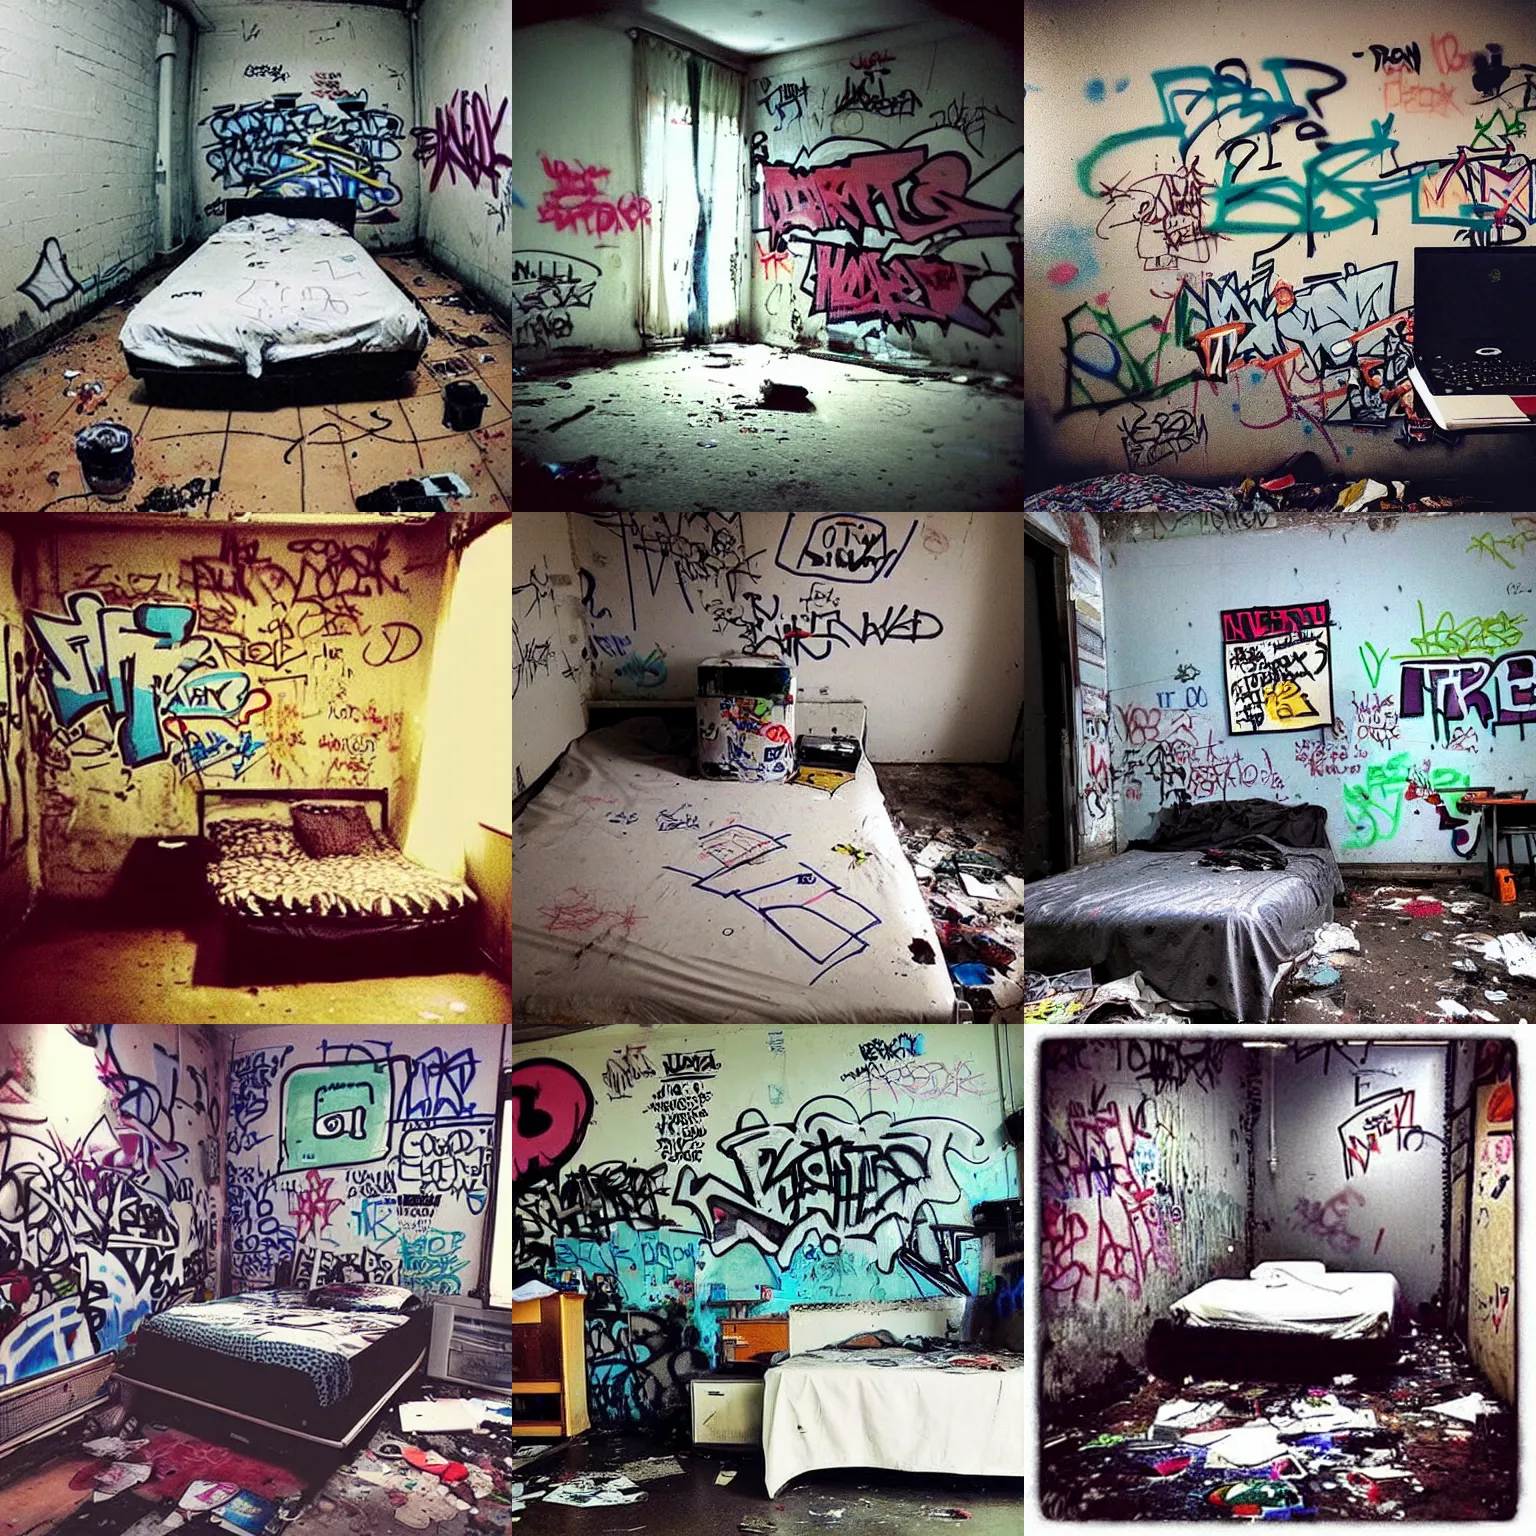 Prompt: “photo of a small lonely filthy bedroom with a dirty mattress with a Thinkpad on it and garbage everywhere on the floor and graffiti on the walls in the style of Jon Divola”